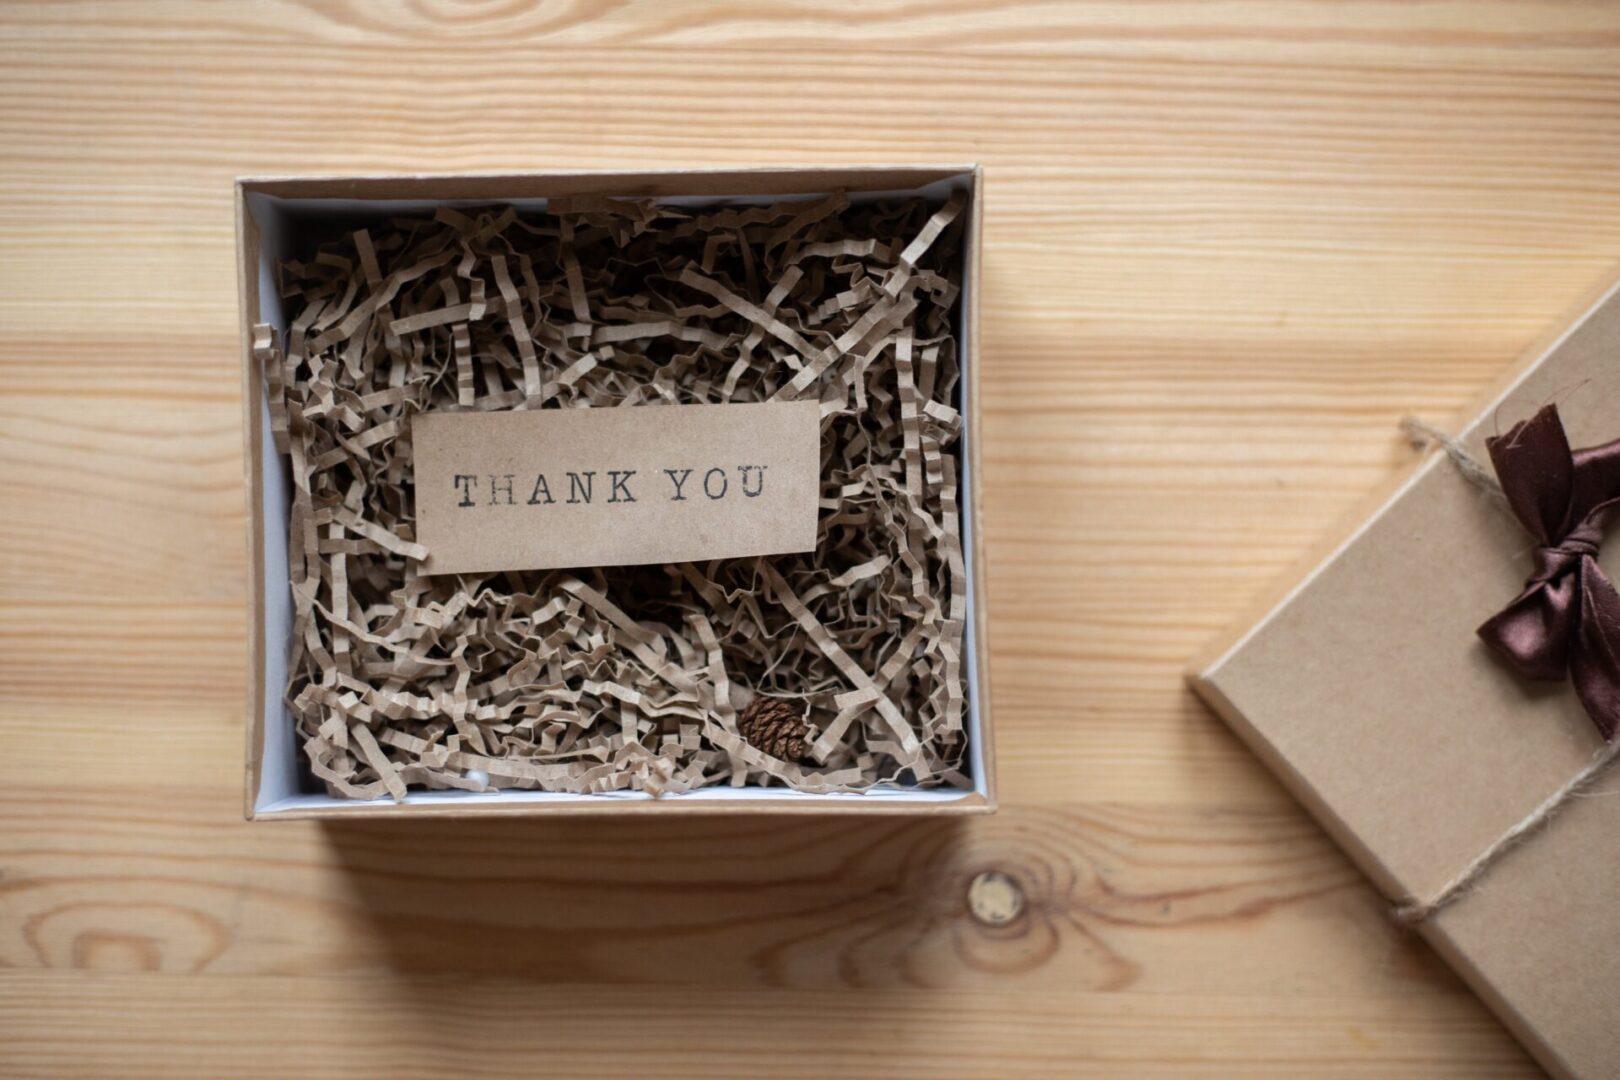 A box with shredded paper and a thank you note.